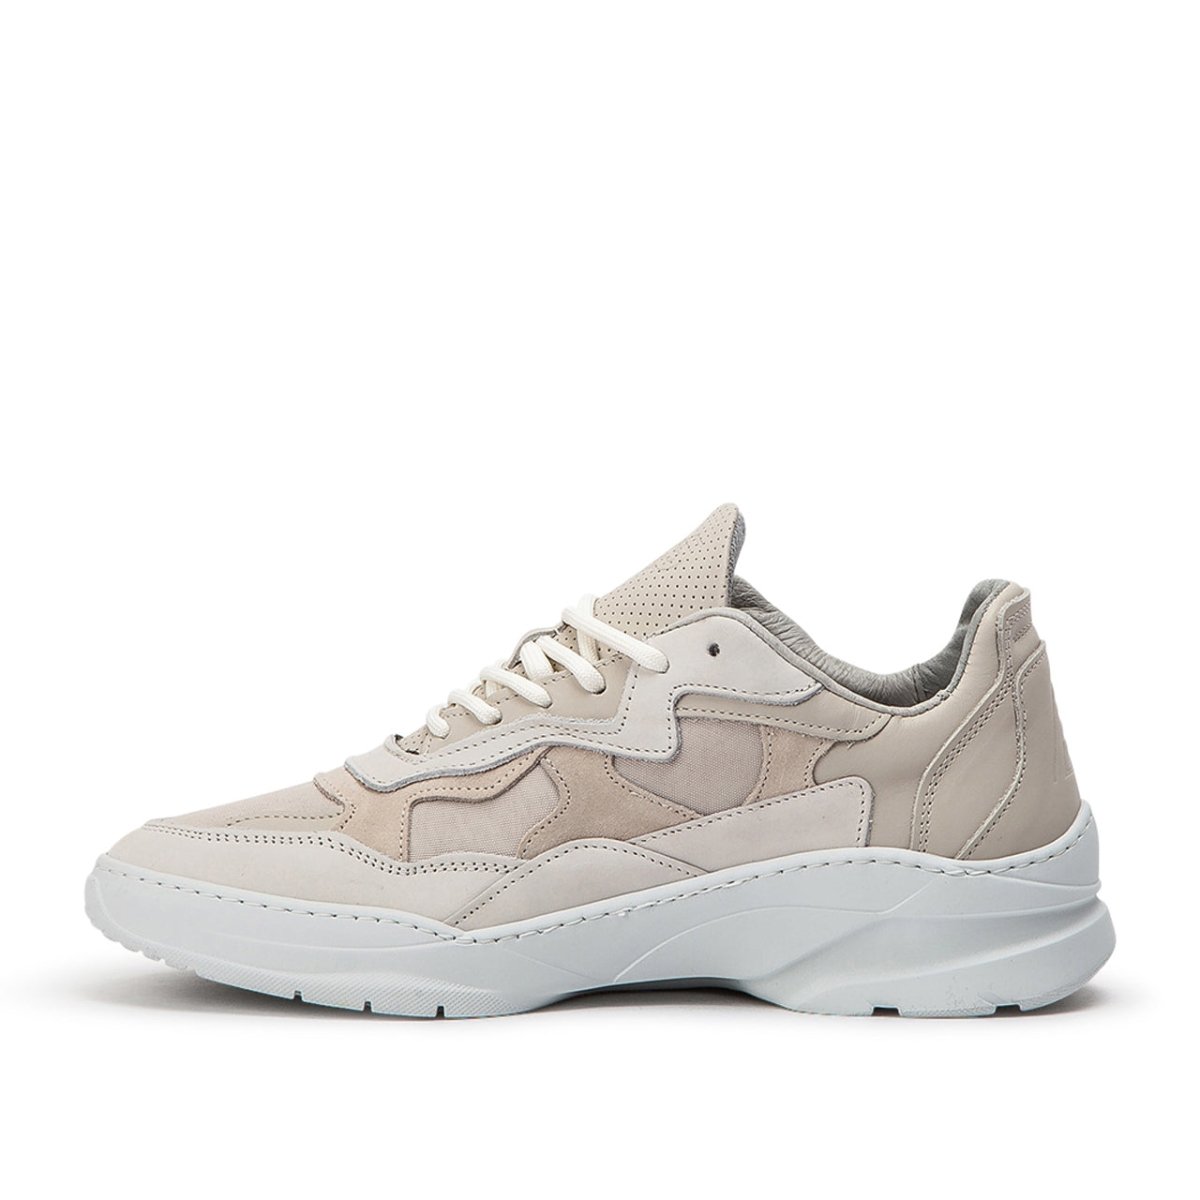 Filling Pieces Low Fade Cosmo Infinity (Weiß)  - Allike Store